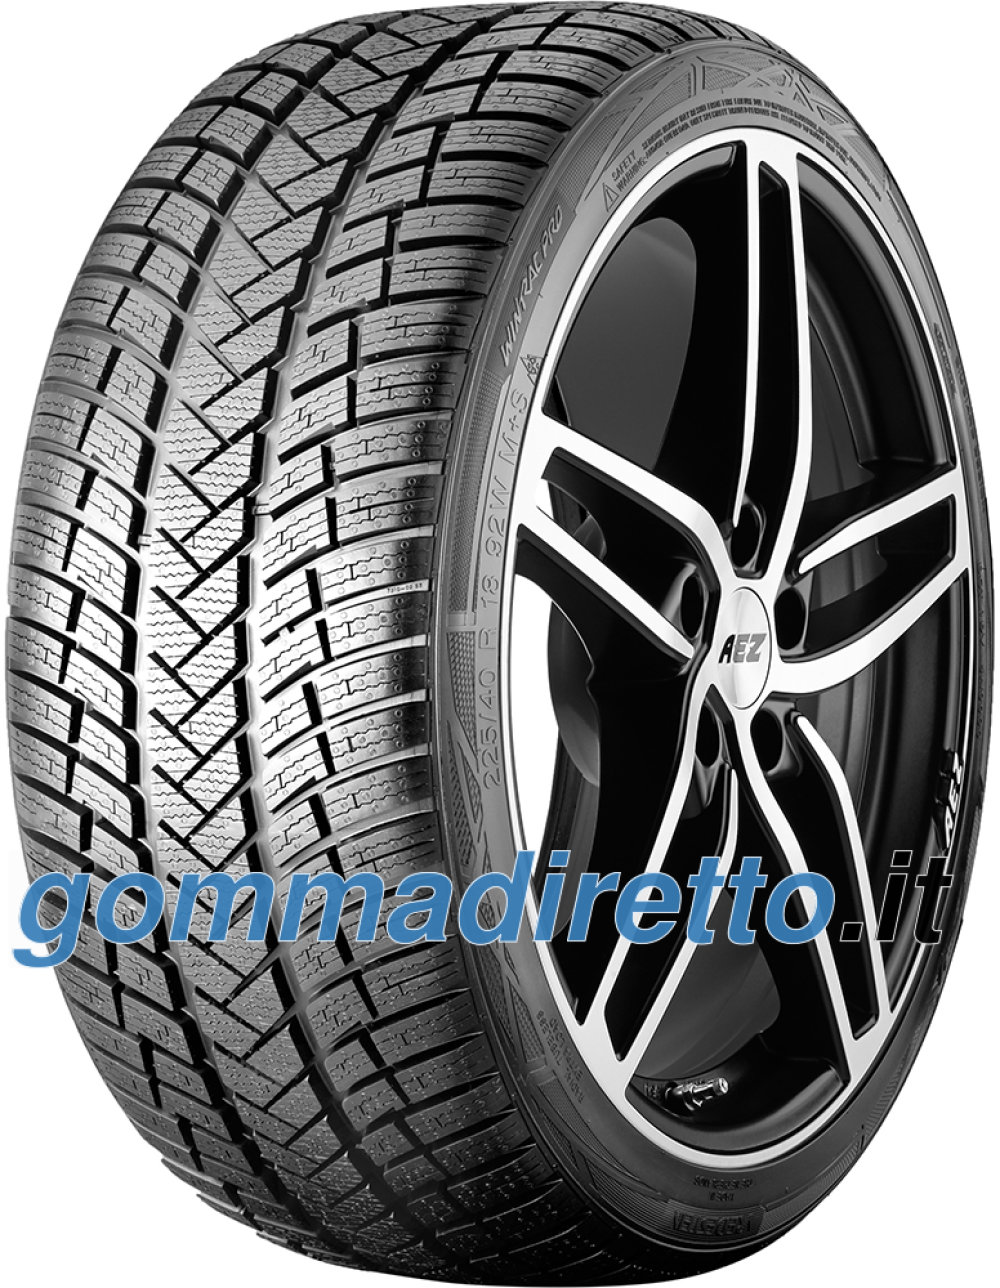 Image of Vredestein Wintrac Pro ( 205/50 R17 93V XL )